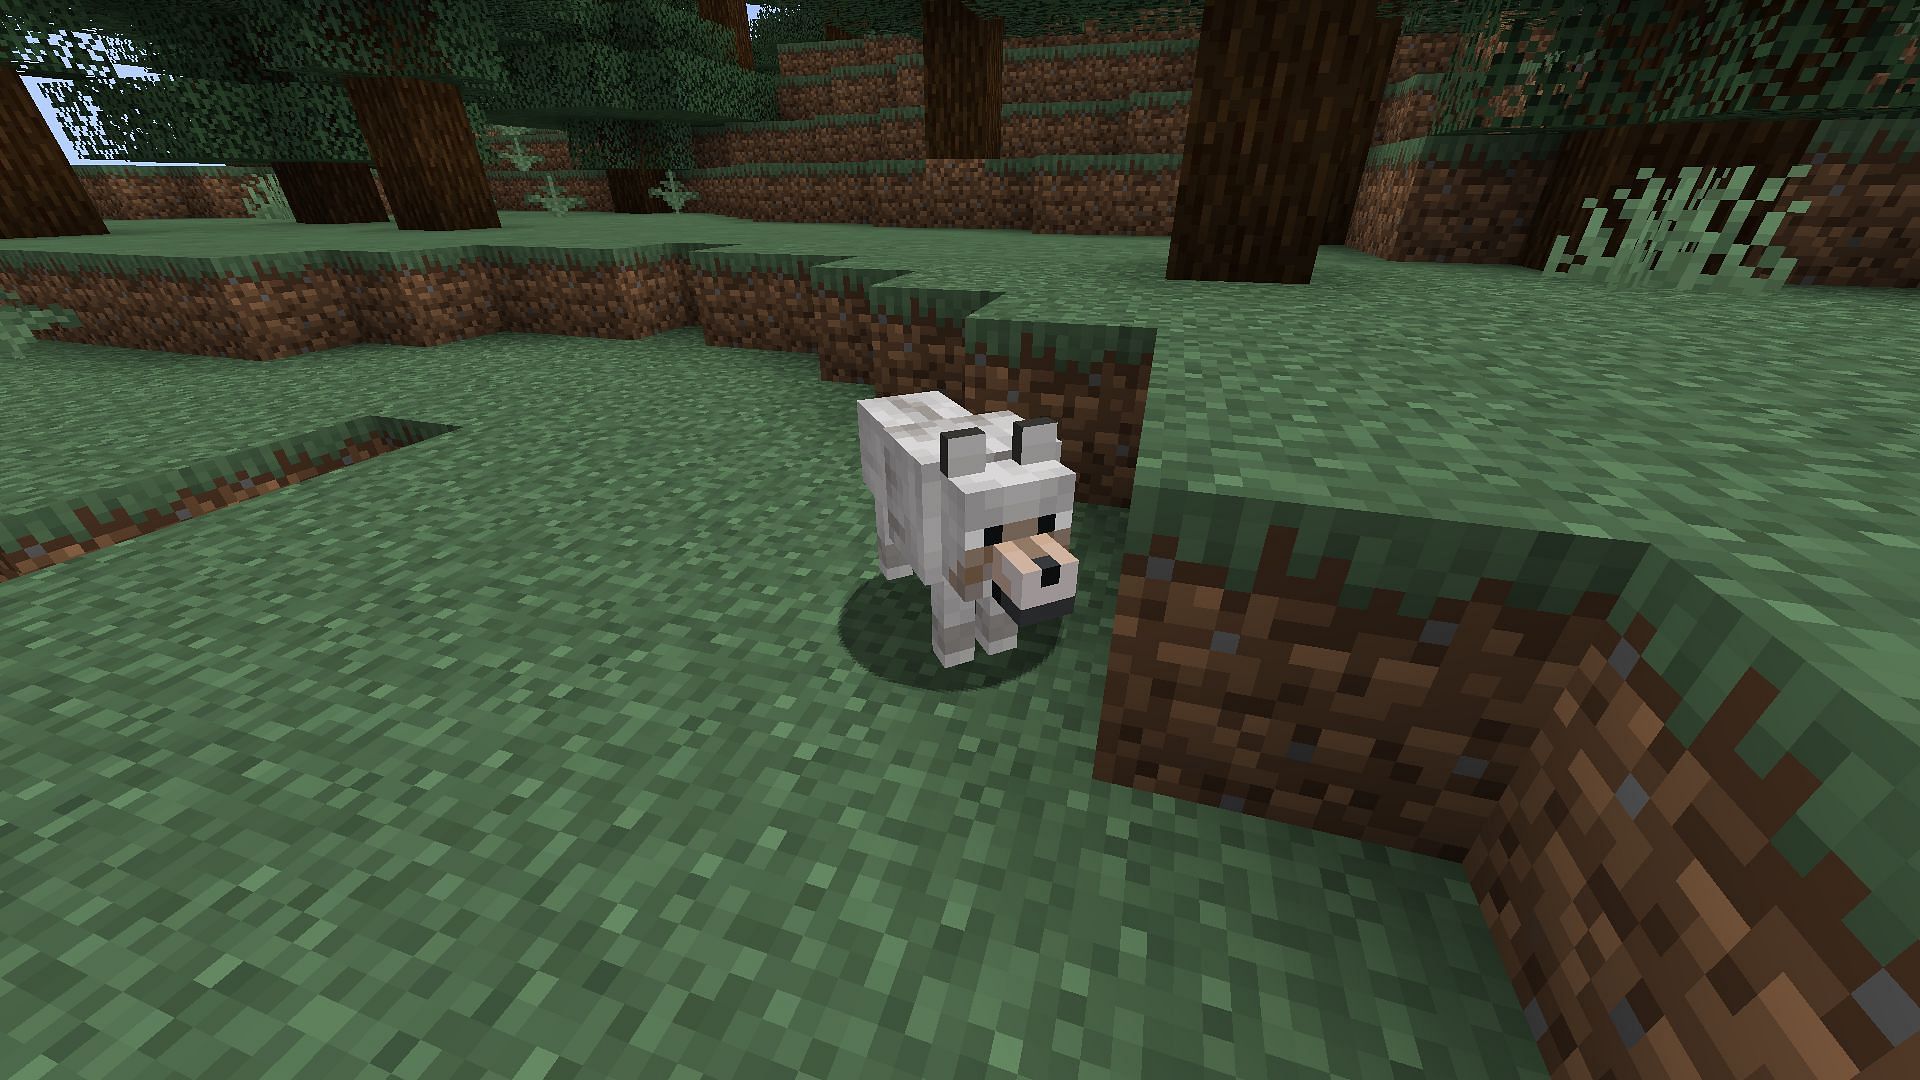 Wolves will attack almost any mob that will try to hurt their master in Minecraft (Image via Mojang)